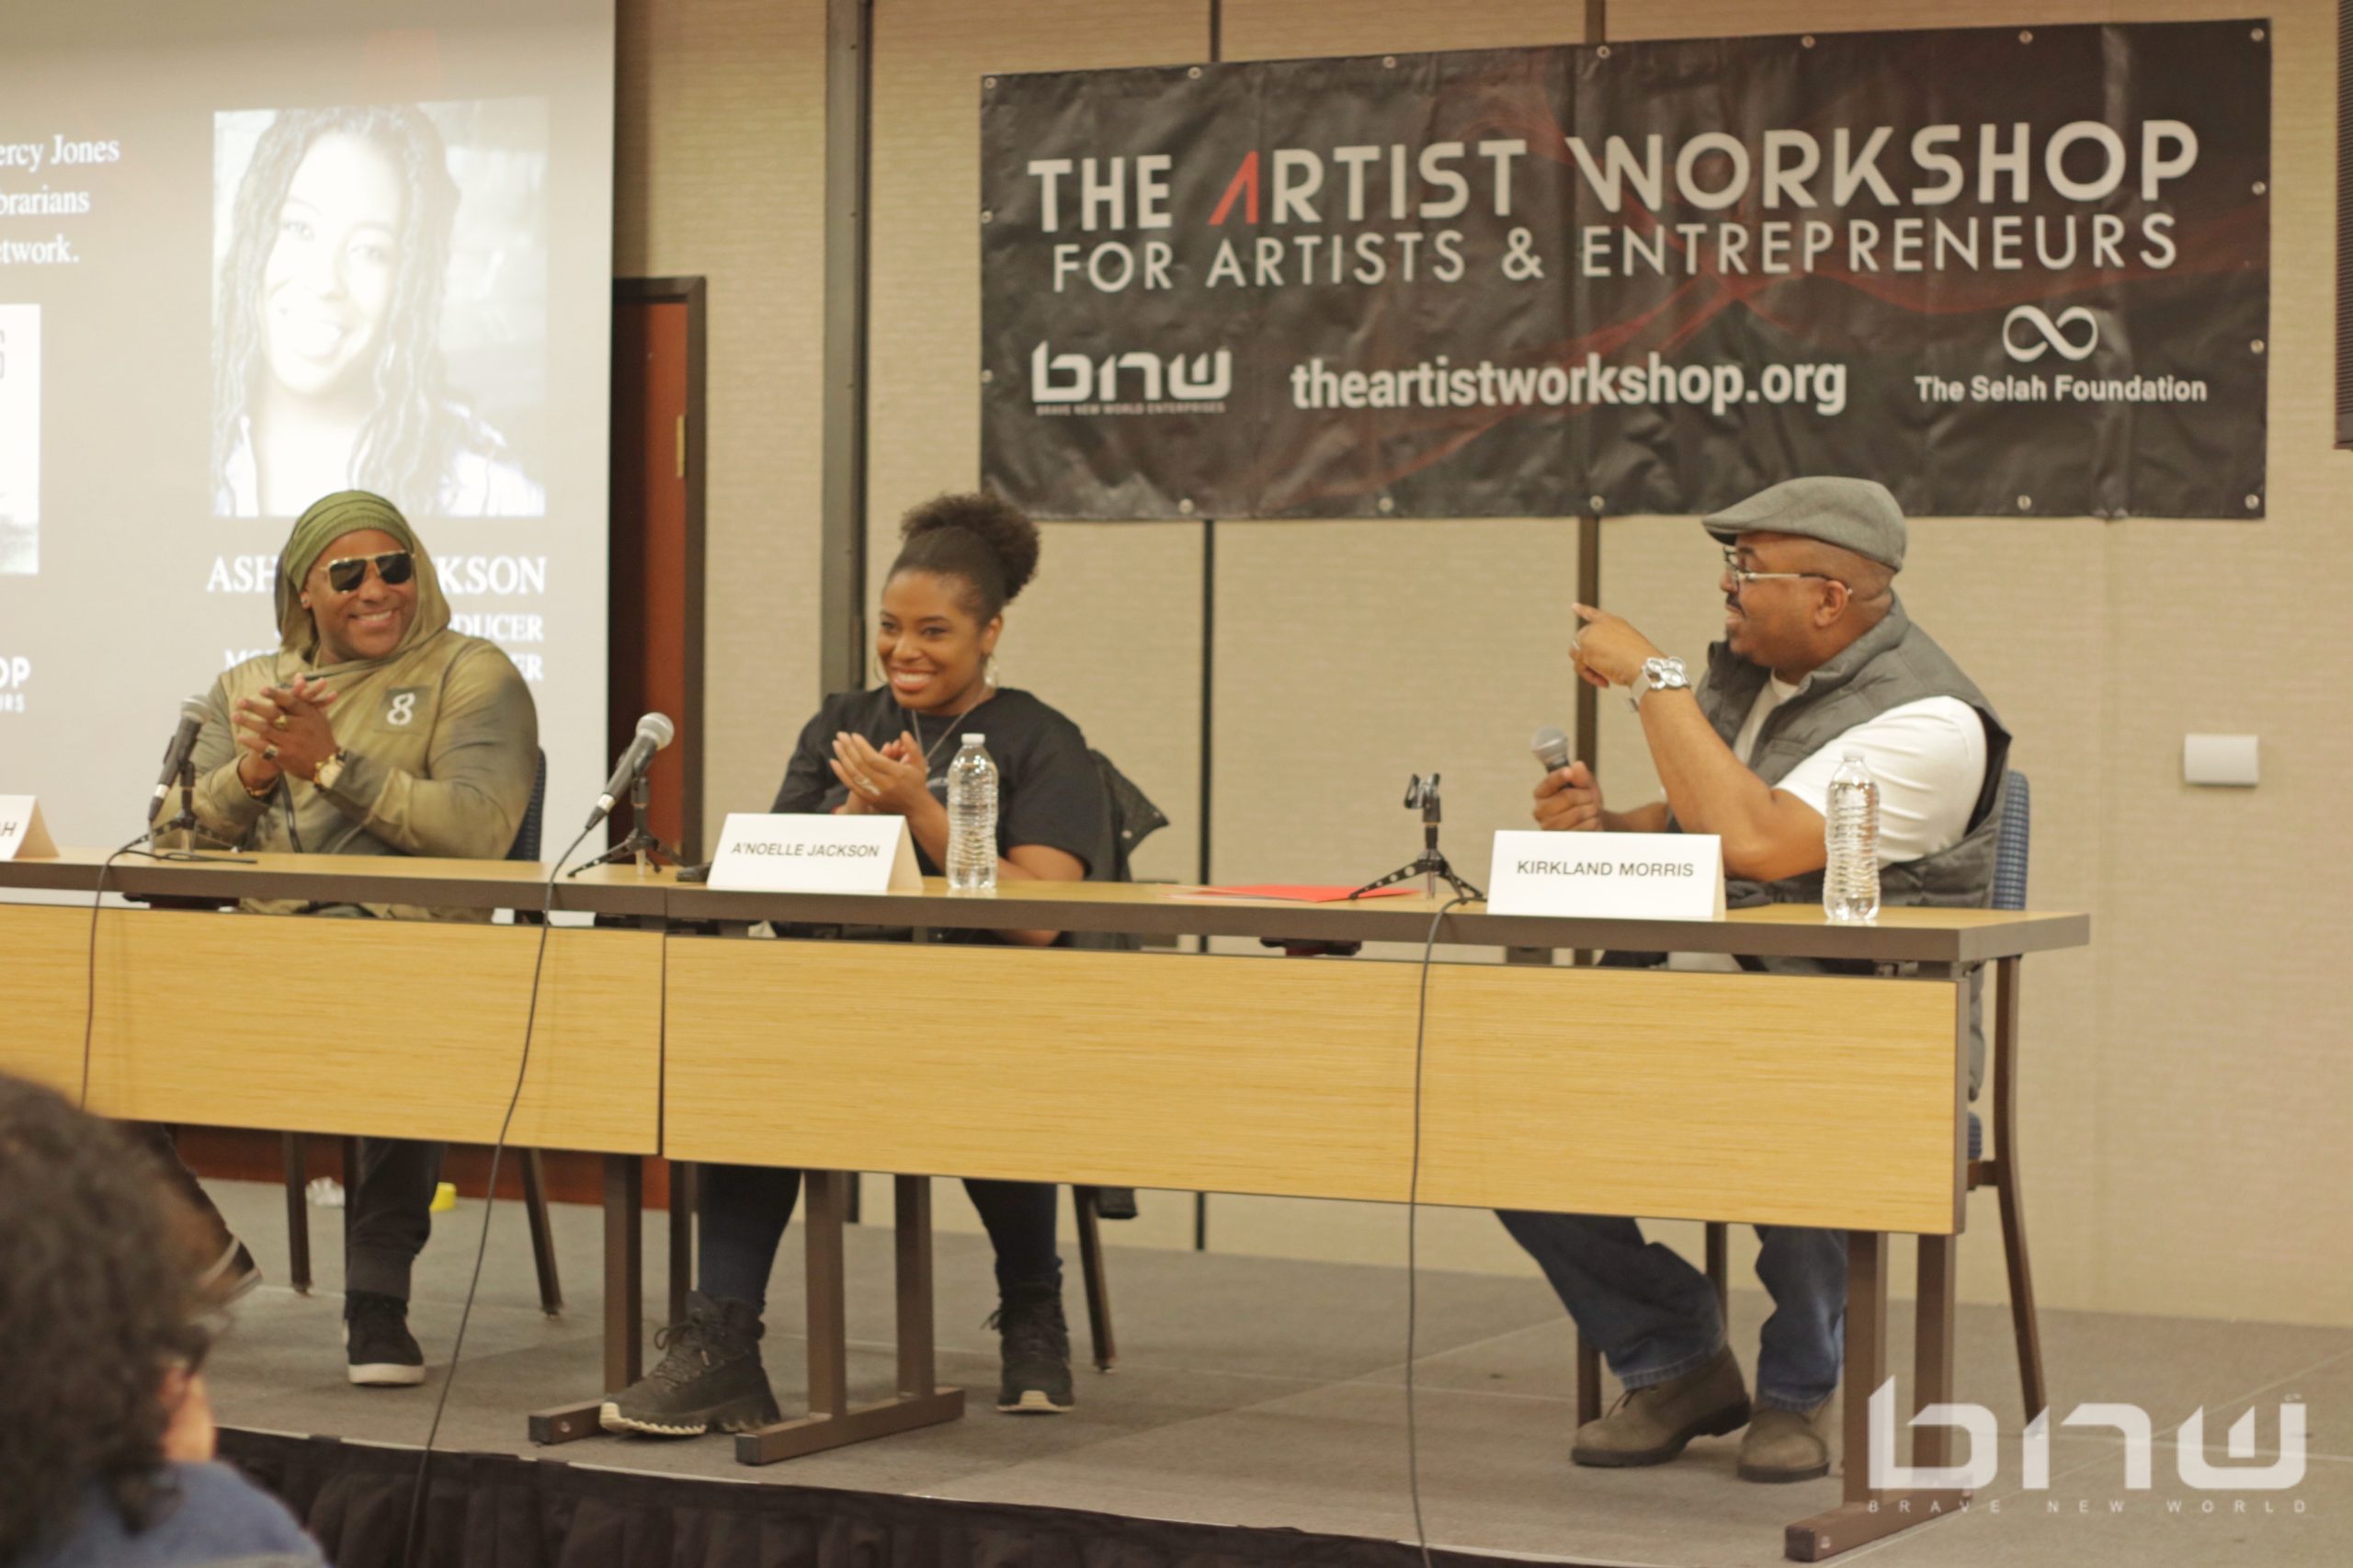 Panelists Shyan Selah, A'Noelle Jackson and Kirkland Morris share a laugh together at The Artist Workshop: The Actor